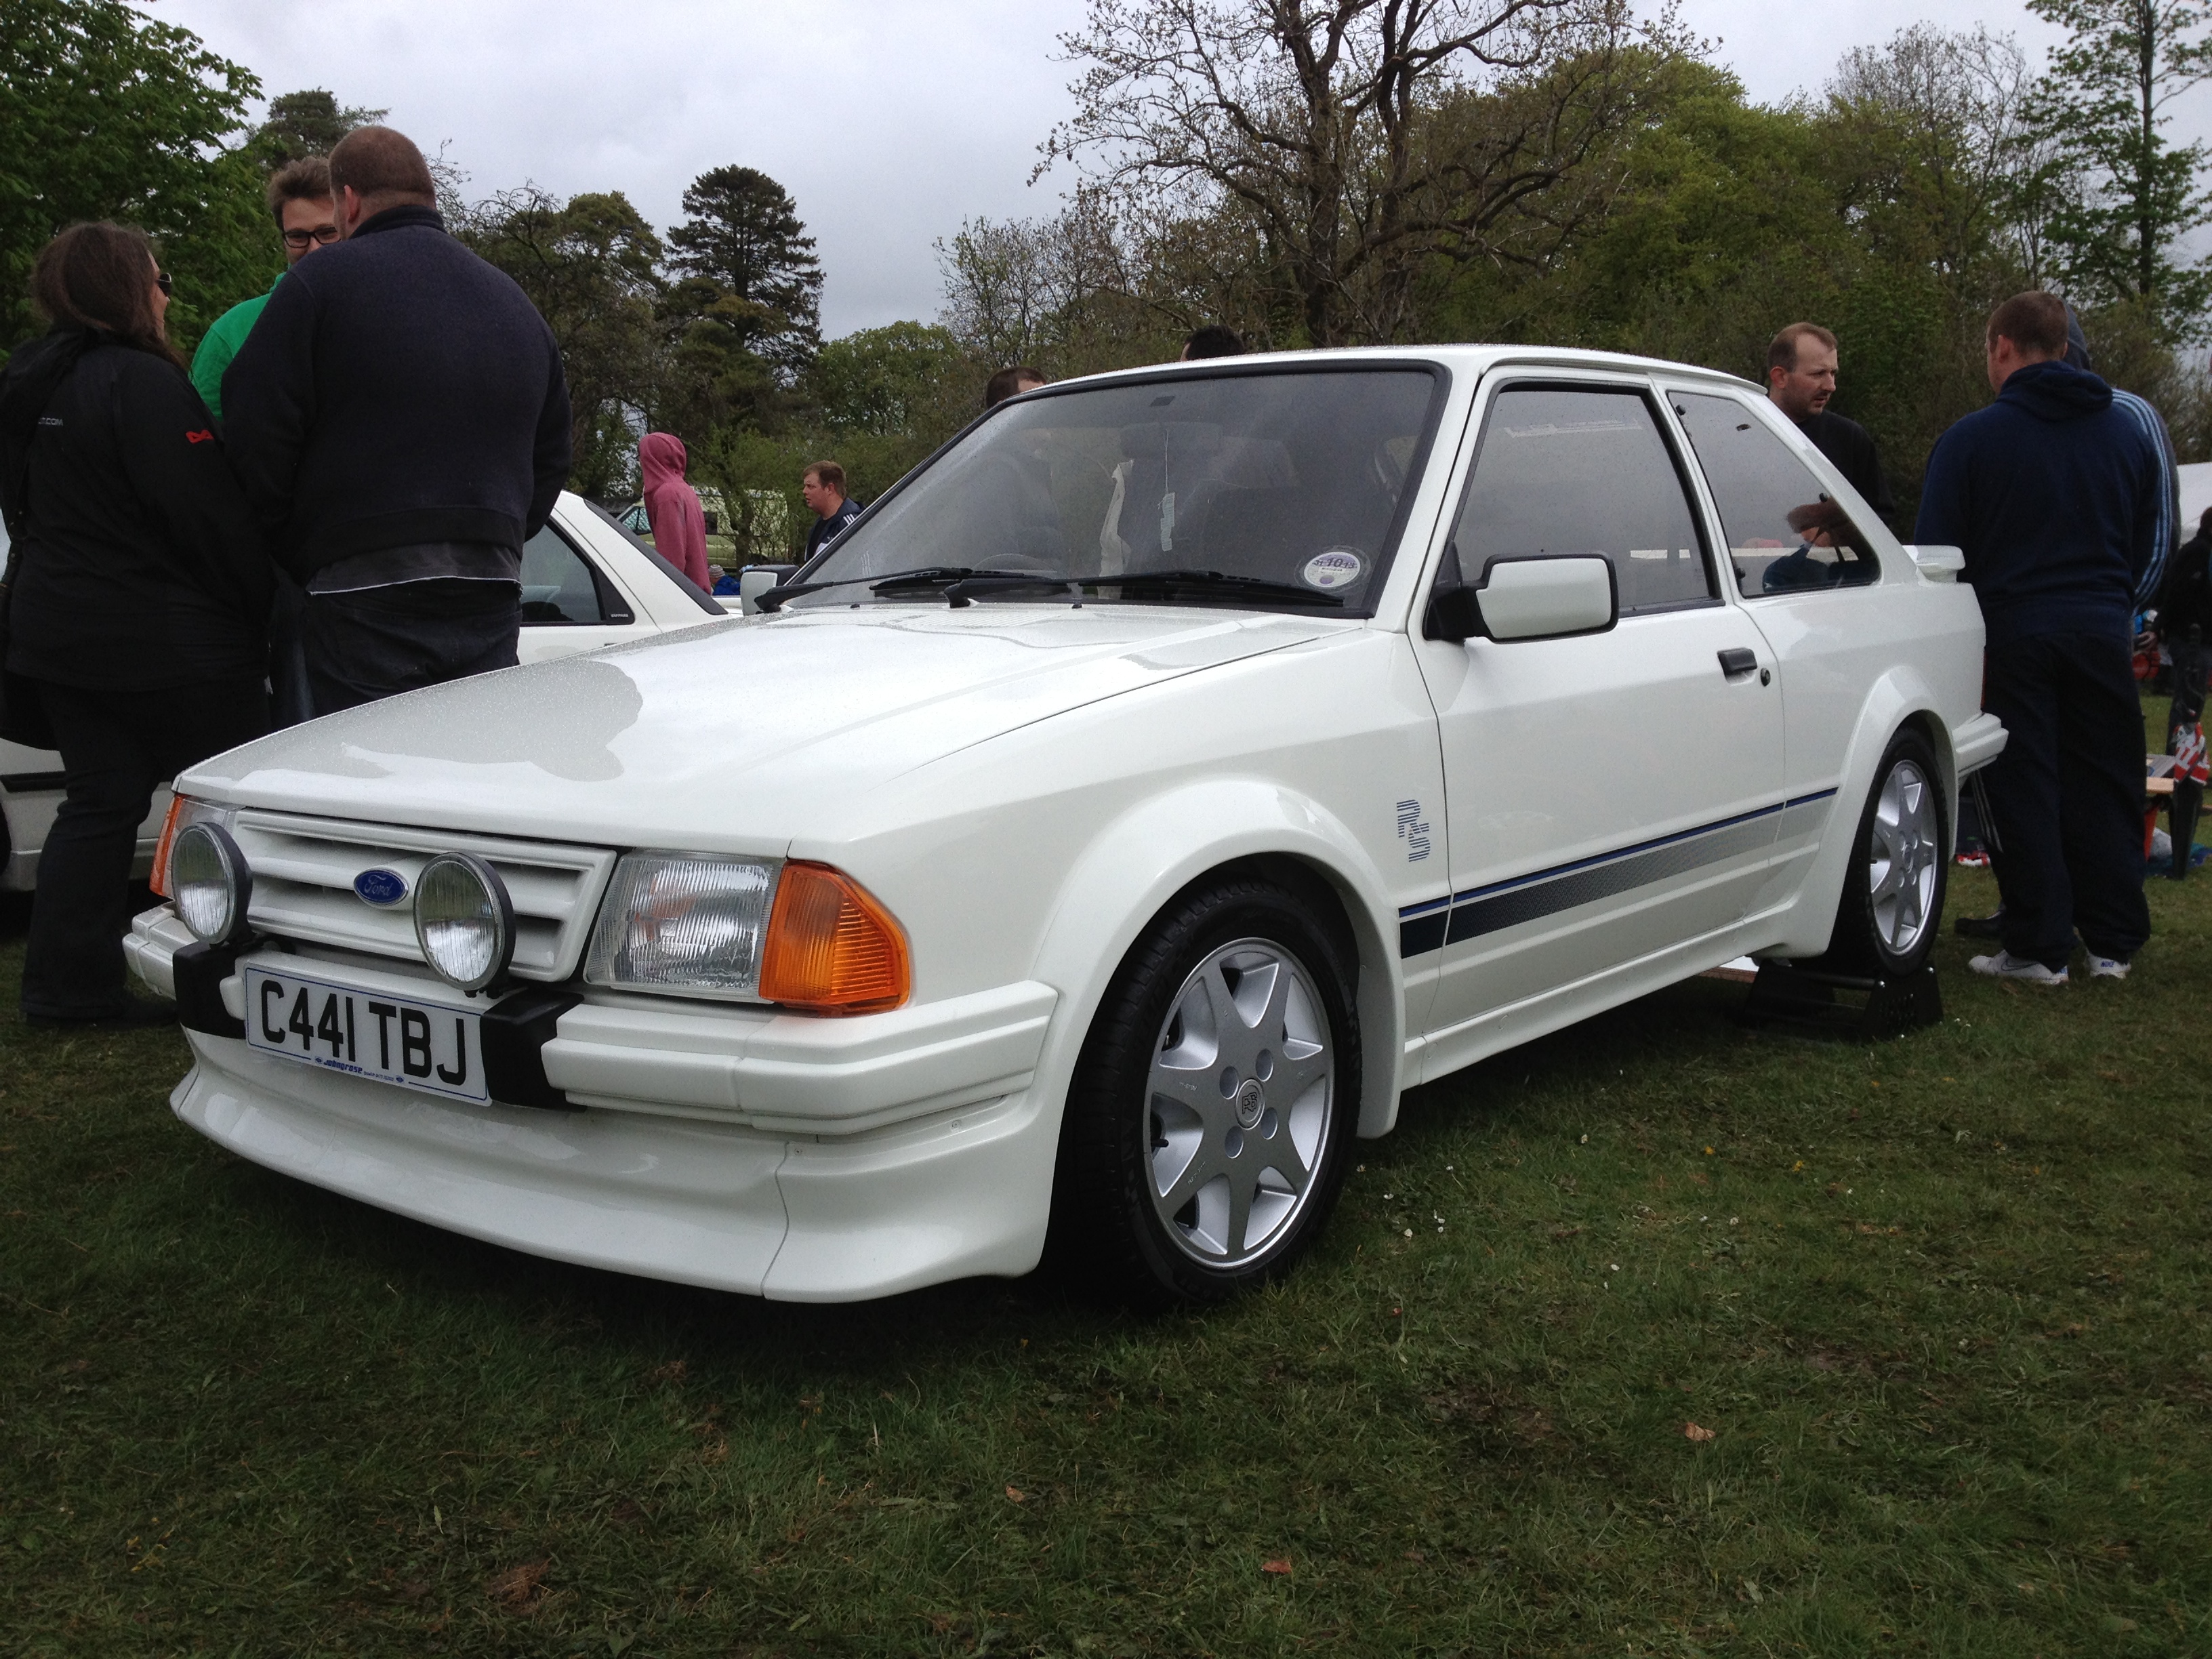 The Series 1 Rs Turbo Finished In Concours Cumbria 13 Passionford Ford Focus Escort Rs Forum Discussion